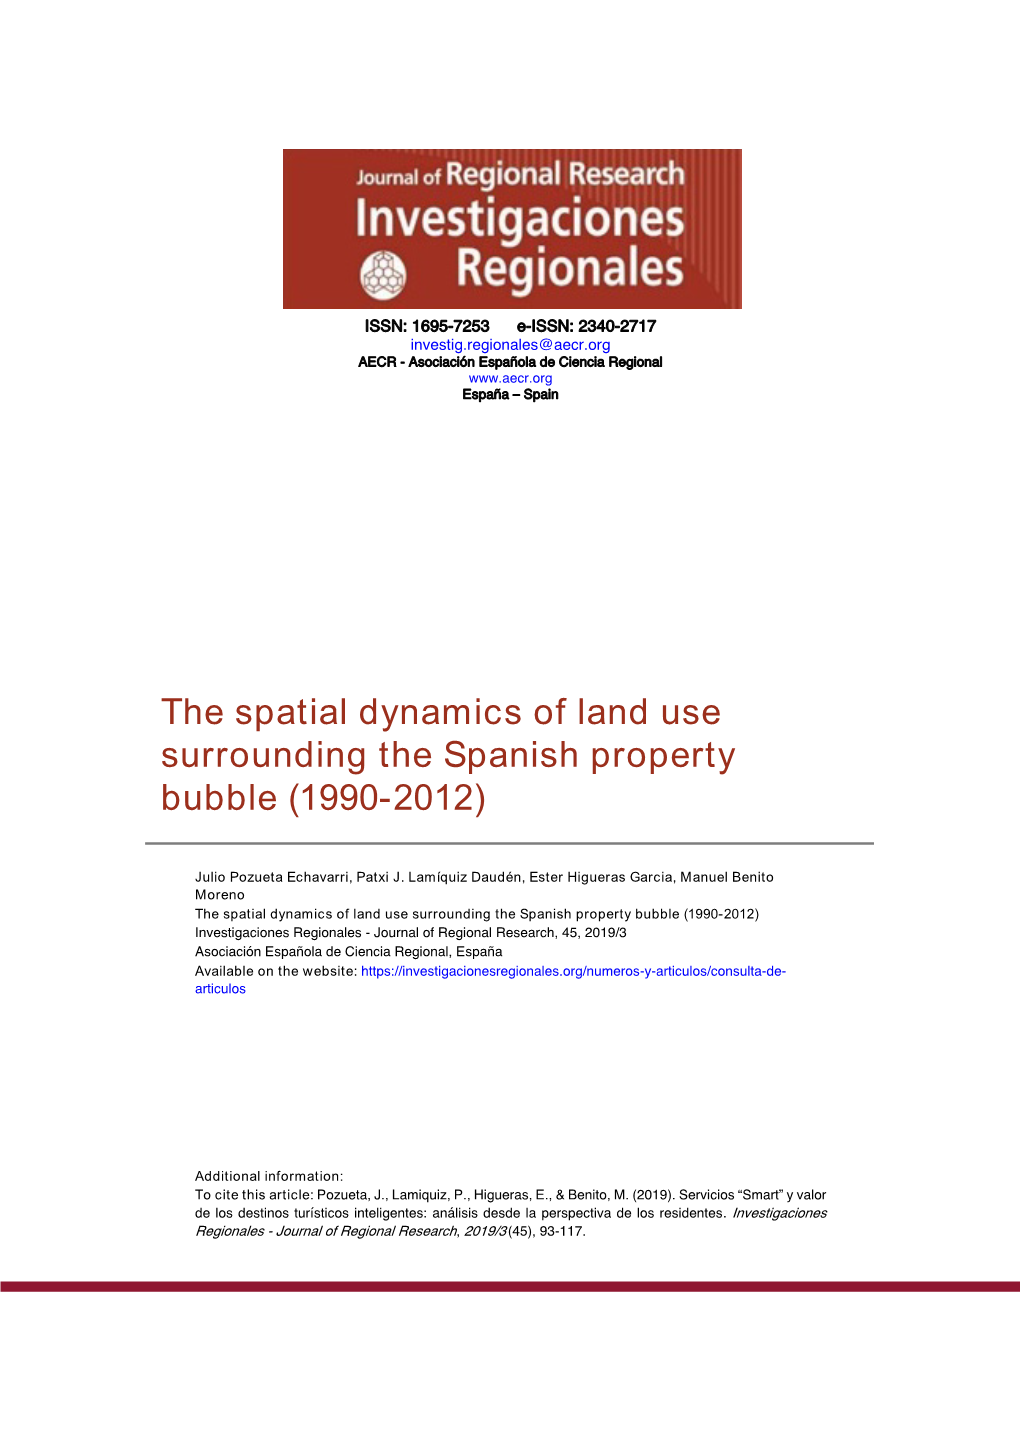 The Spatial Dynamics of Land Use Surrounding the Spanish Property Bubble (1990-2012)